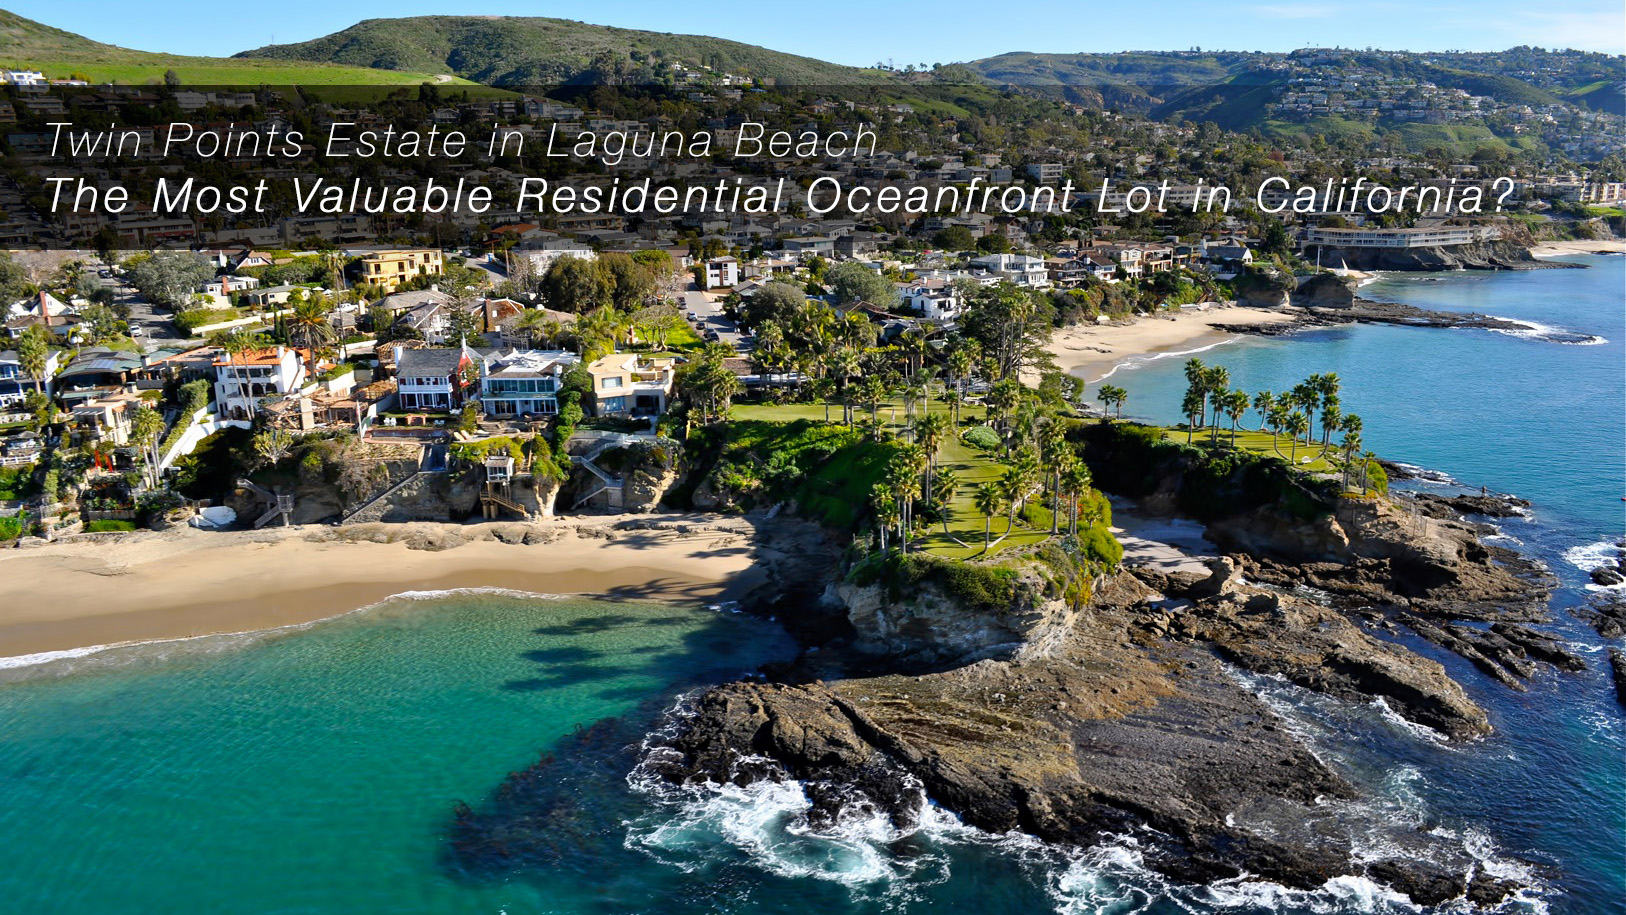 Twin Points Estate in Laguna Beach – The Most Valuable Residential Oceanfront Lot in California?